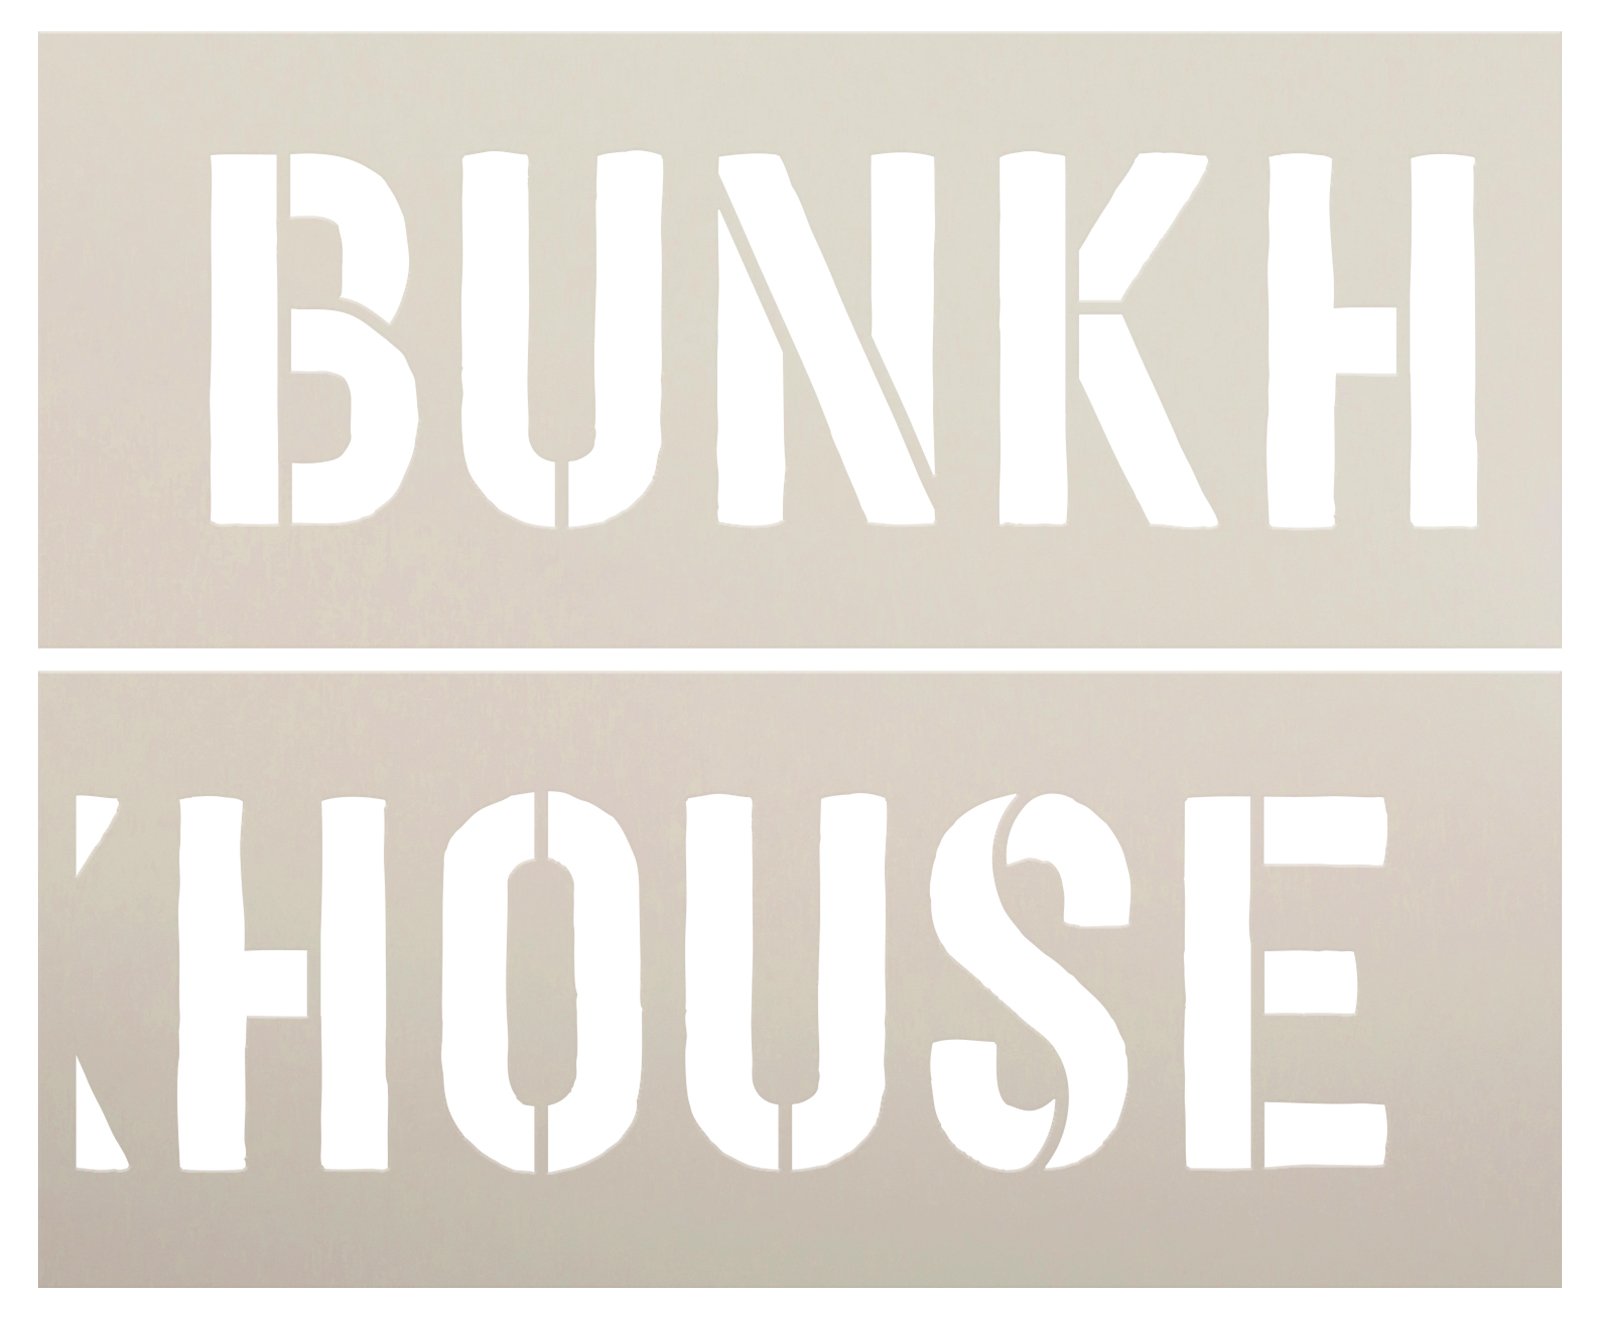 Rustic Bunkhouse Print Word Art Stencil by StudioR12 - Select Size - USA MADE - Craft DIY Modern Farmhouse Bedroom Home Decor | Paint Jumbo Wood Sign